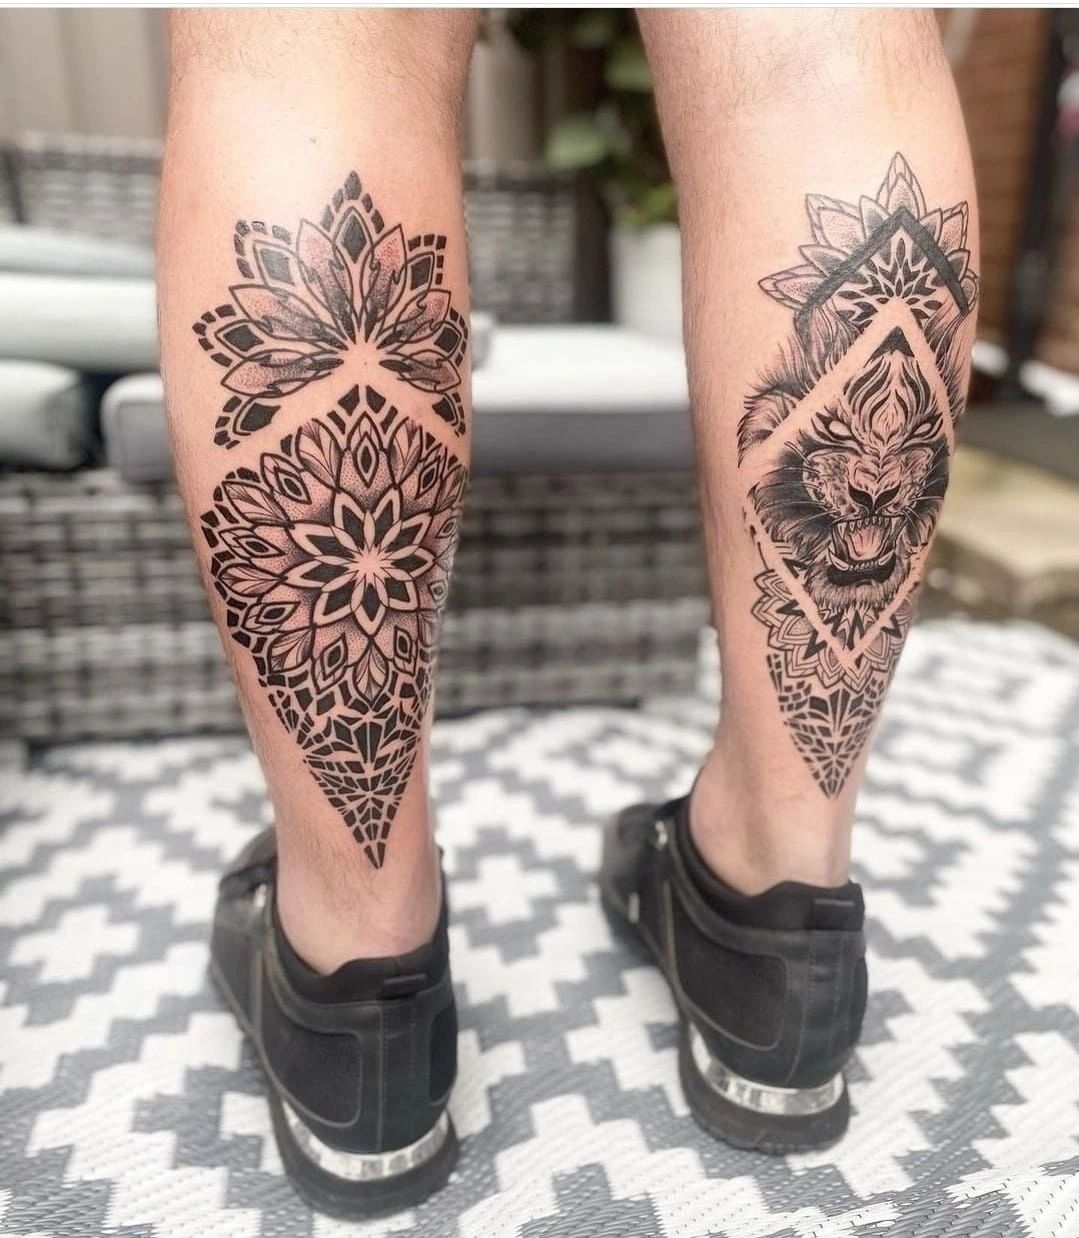 The History of Mandala Tattoos: A Brief Introduction